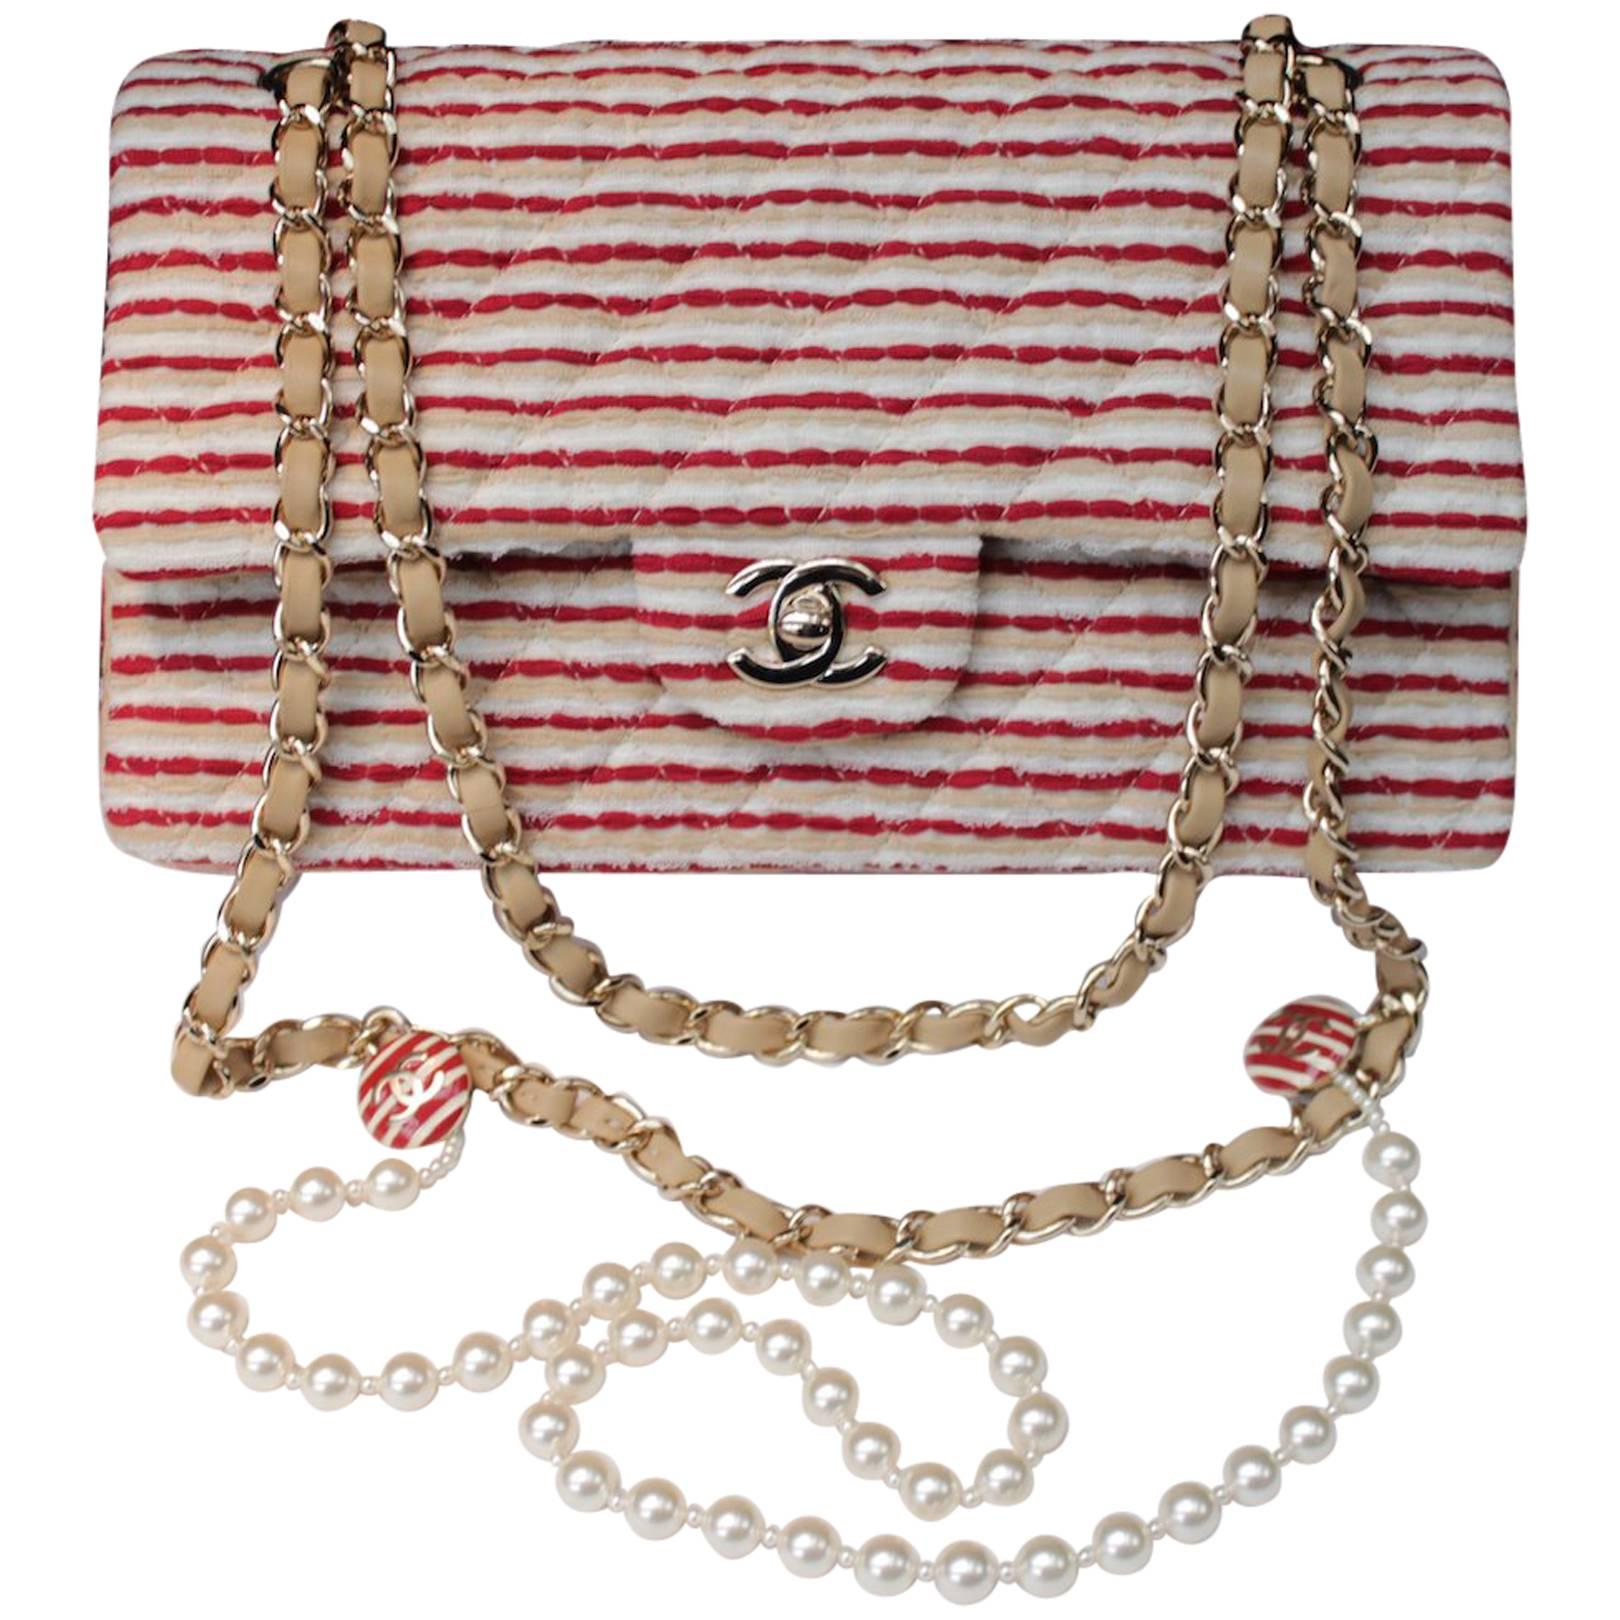 2014 Chanel Timeless White and Red stripes handbag with Faux Pearls Handle For Sale